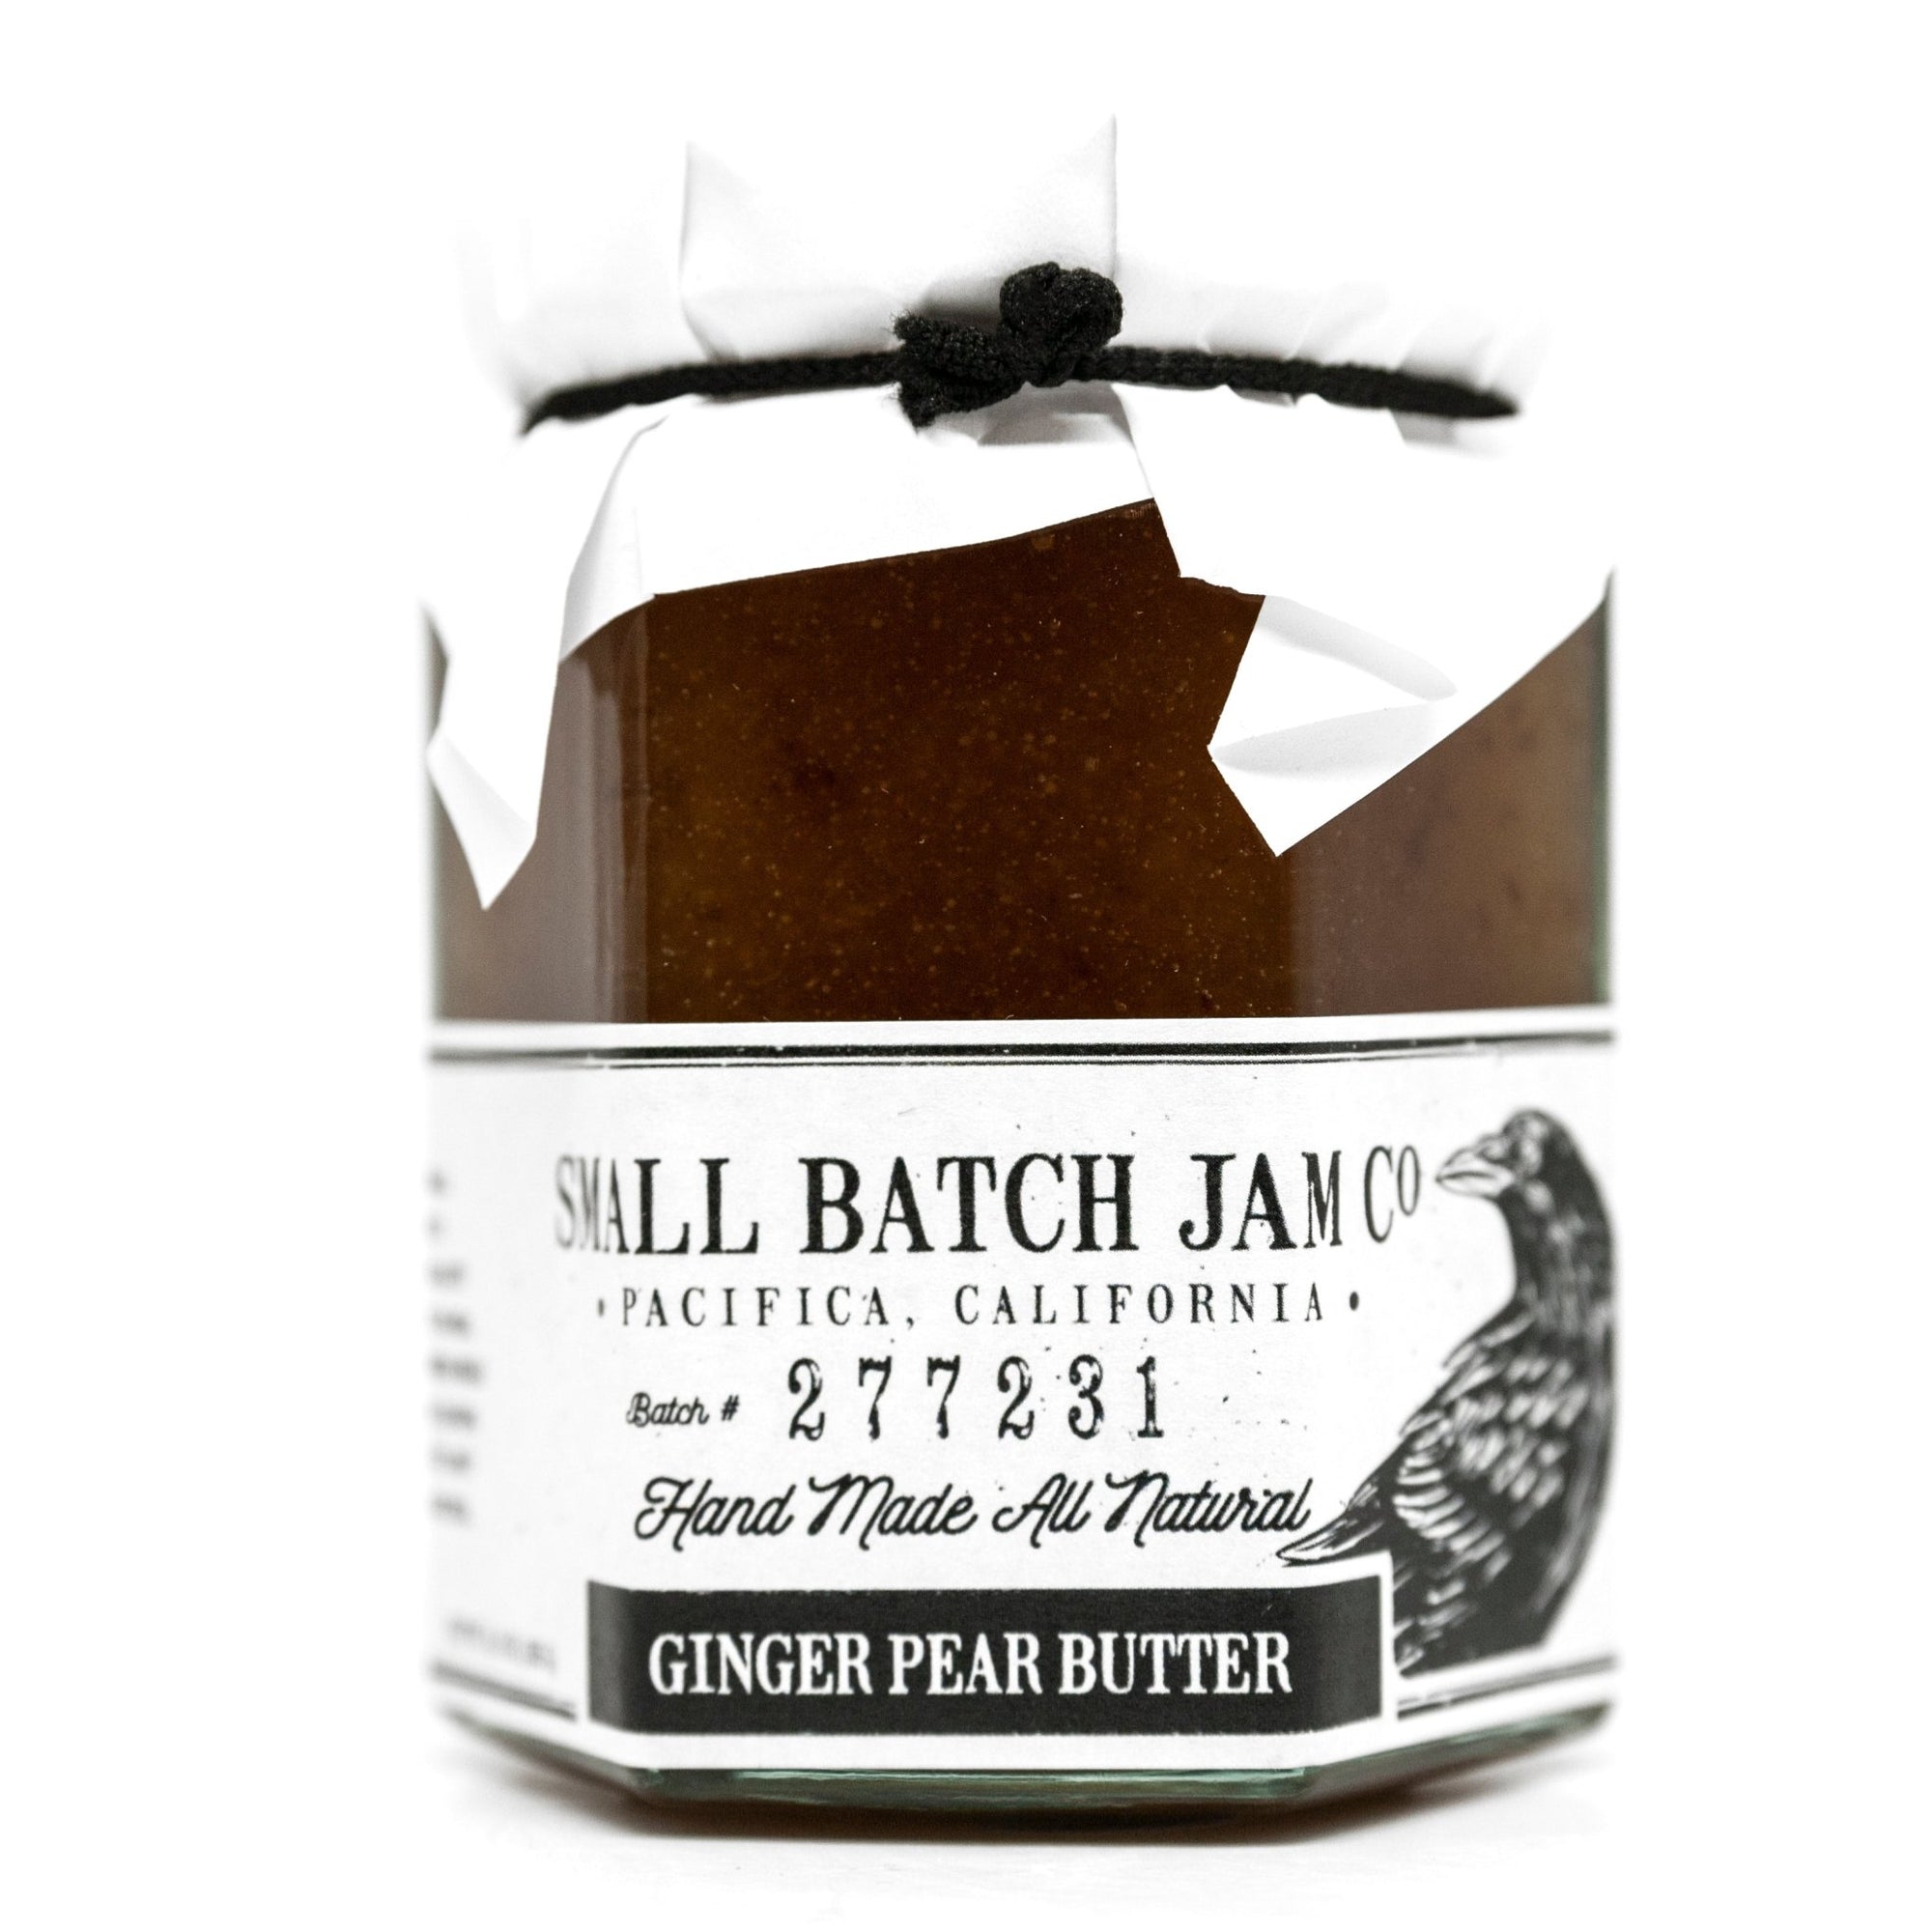 Ginger Pear Butter - Small Batch Jam Co